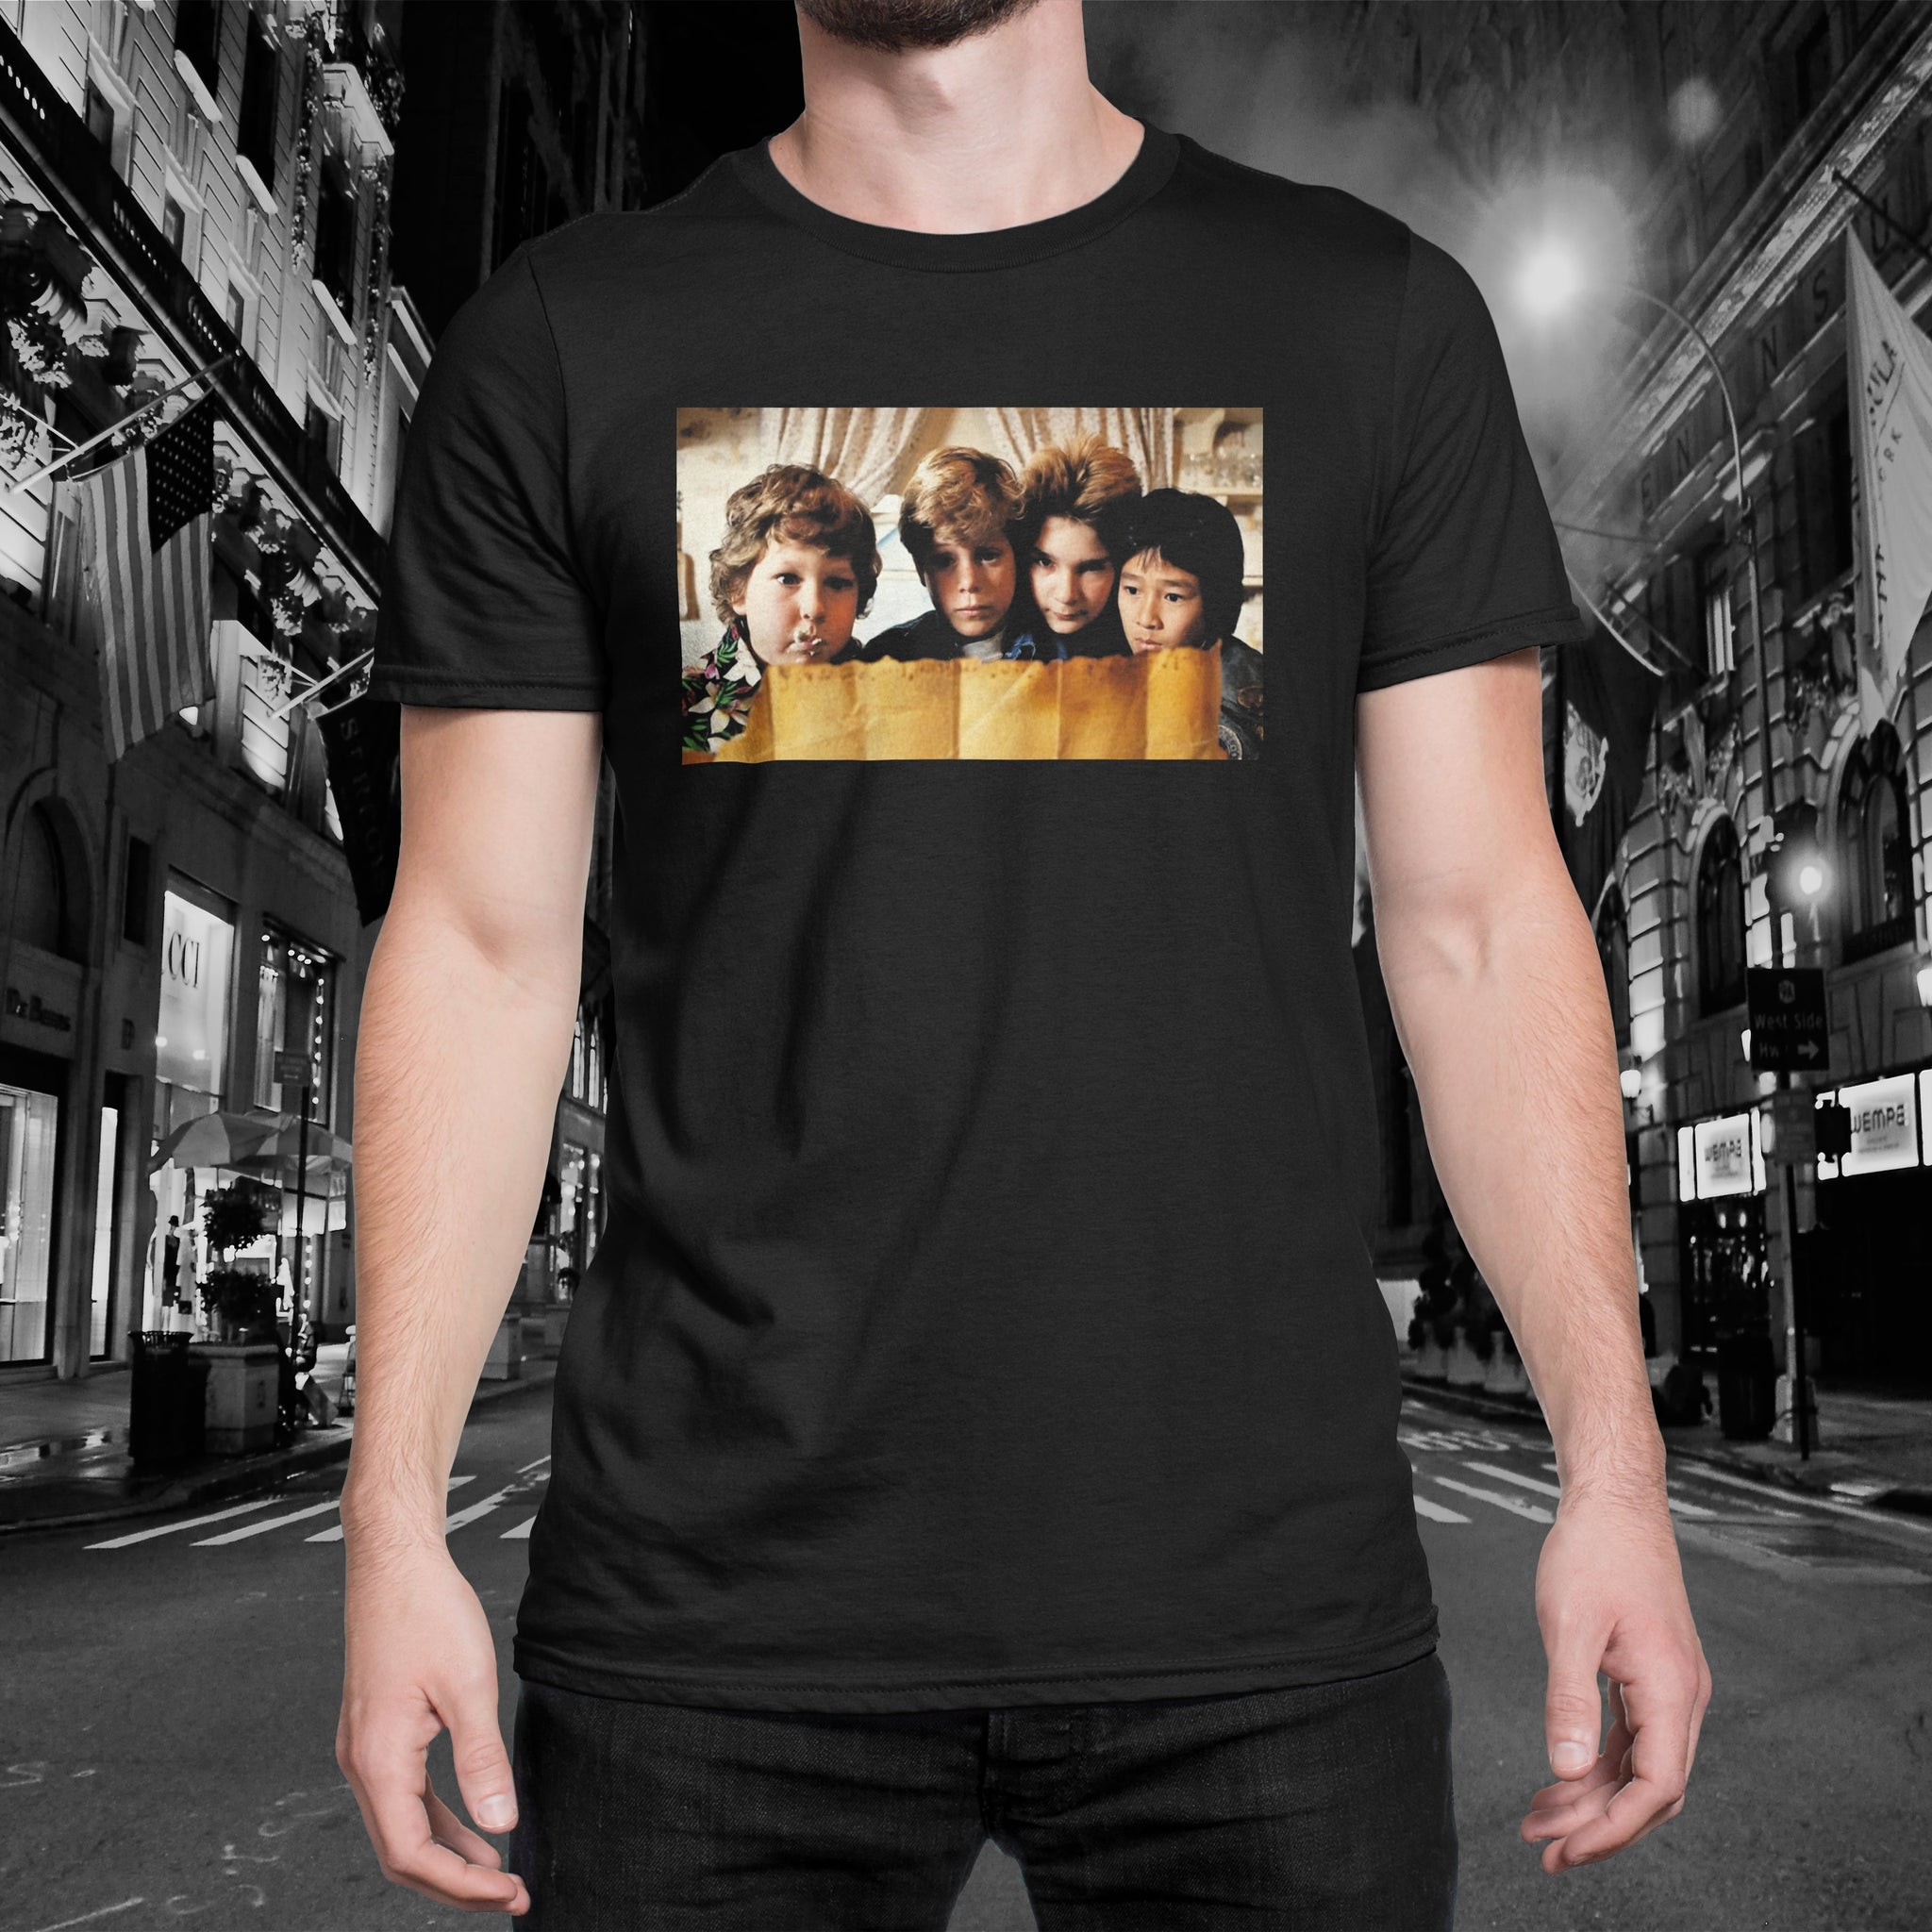 Goonies "Mapped Out" Tee